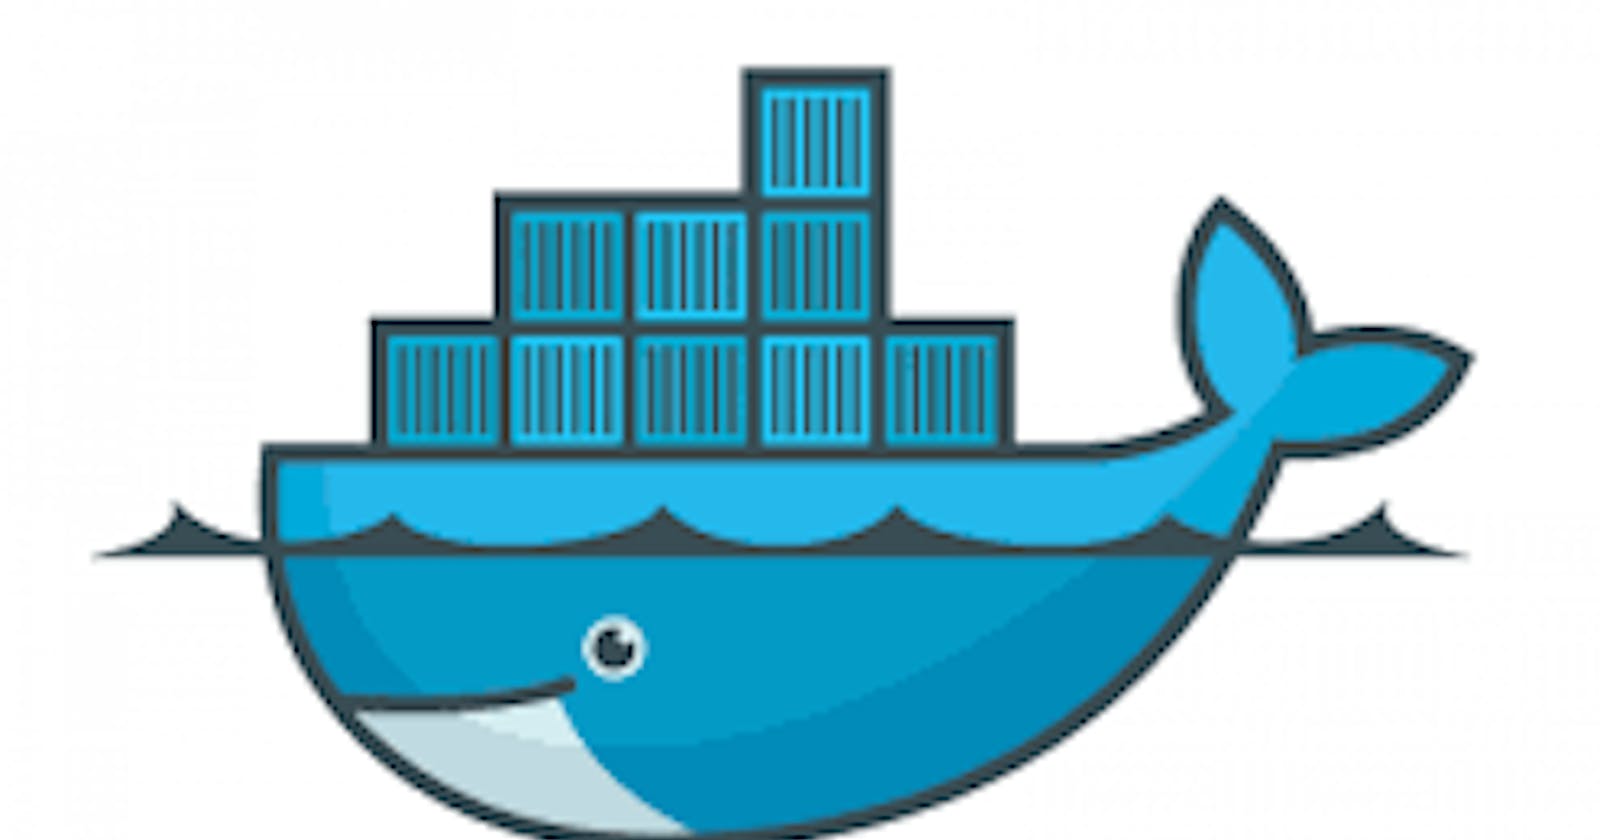 How to Build a Container Image Running on Docker Hub.